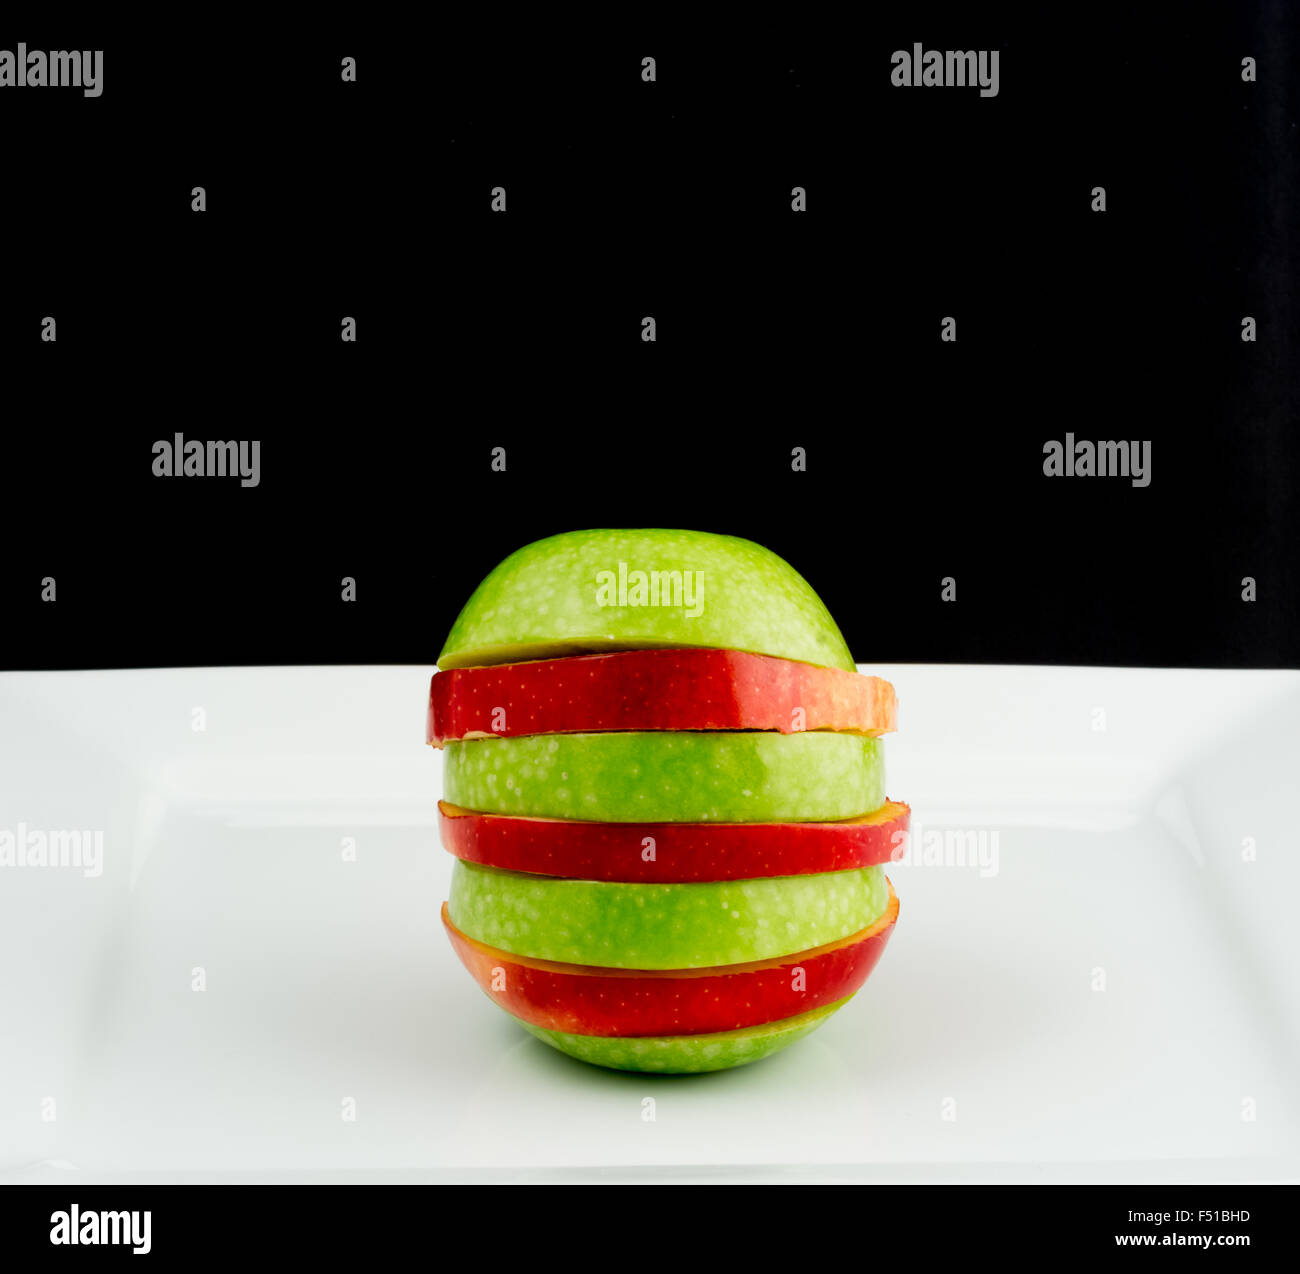 Red and green apple cut into slices Stock Photo